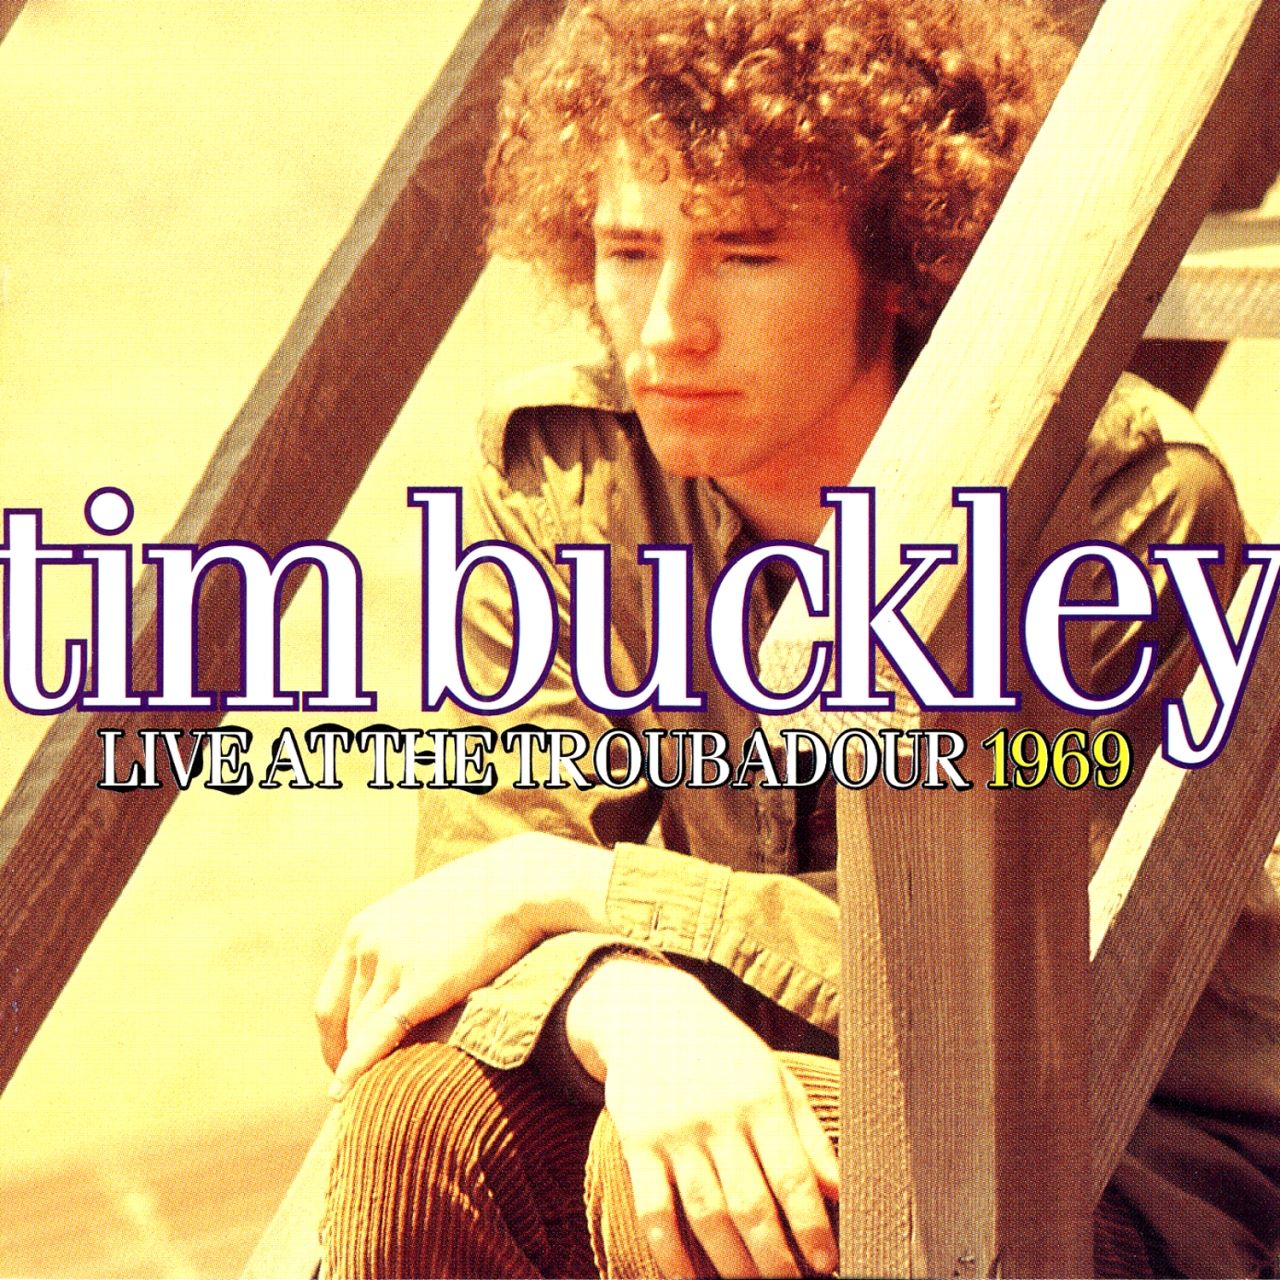 Tim Buckley - Live At The Troubadour 1969 cover album